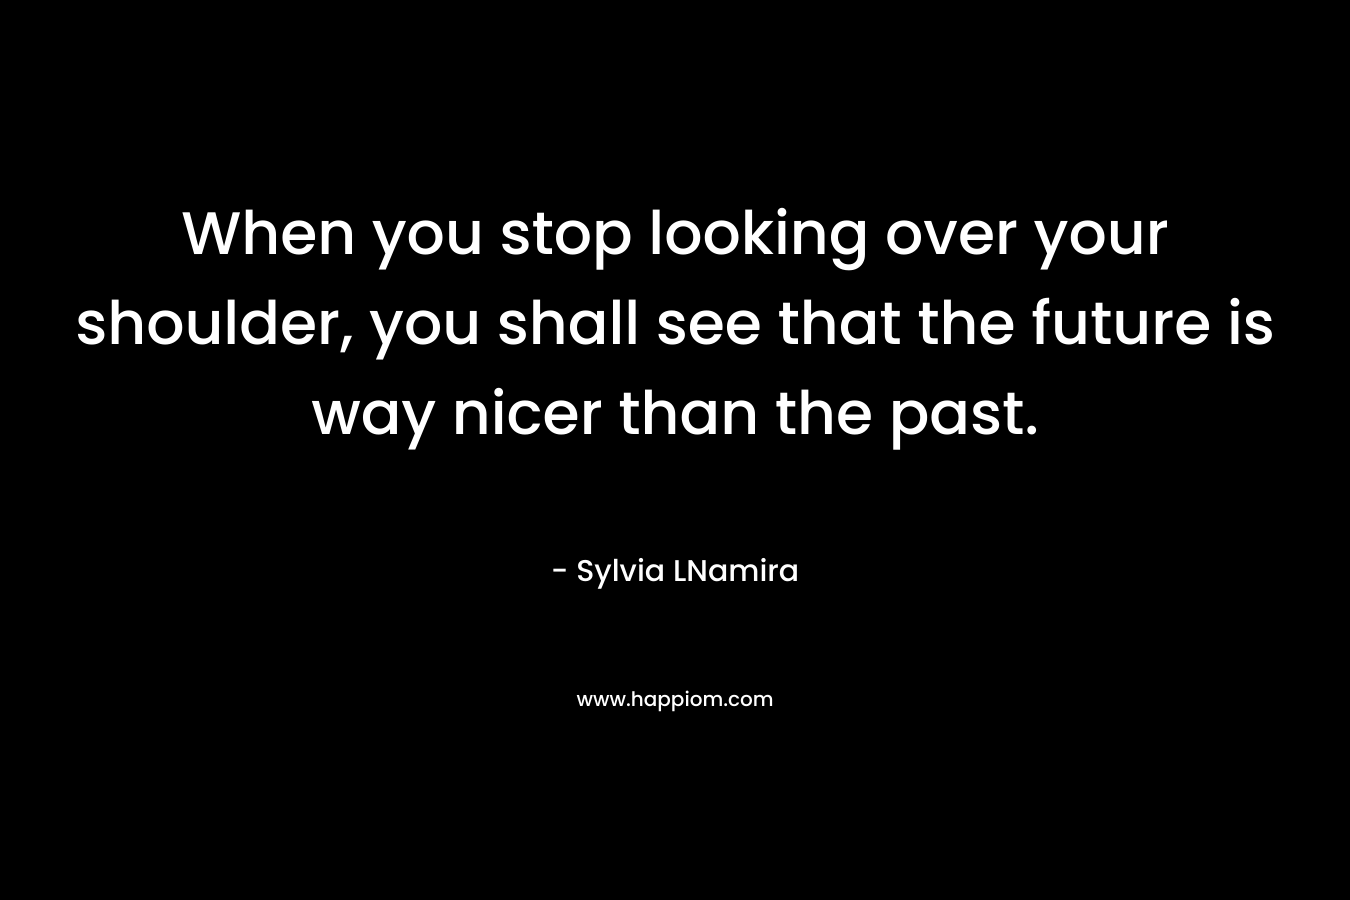 When you stop looking over your shoulder, you shall see that the future is way nicer than the past. – Sylvia LNamira